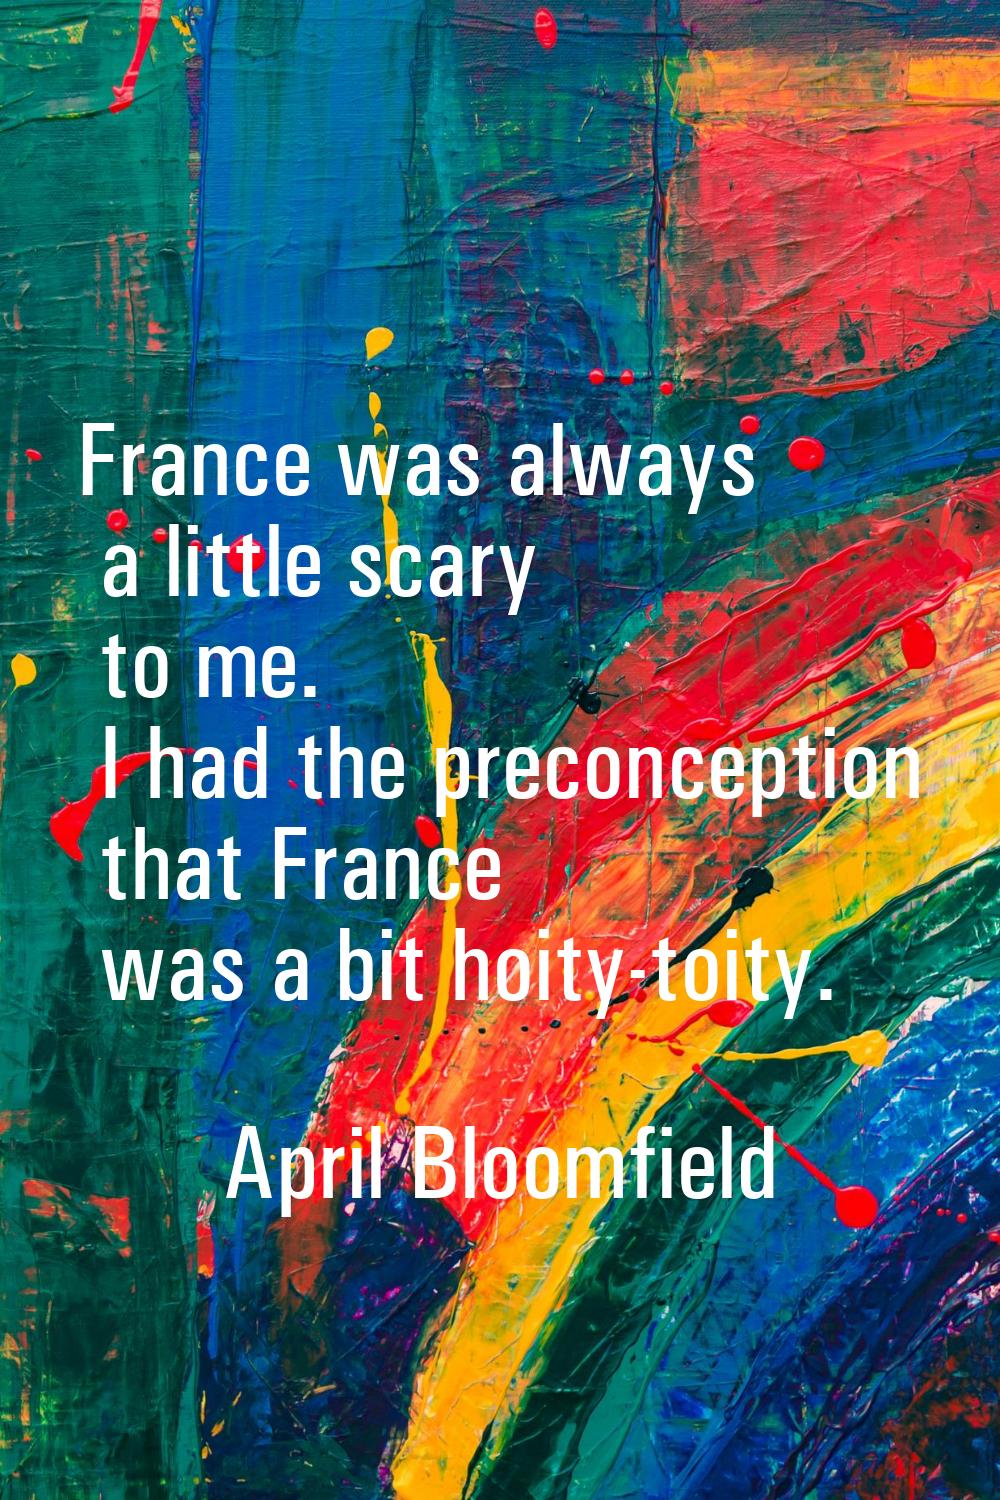 France was always a little scary to me. I had the preconception that France was a bit hoity-toity.